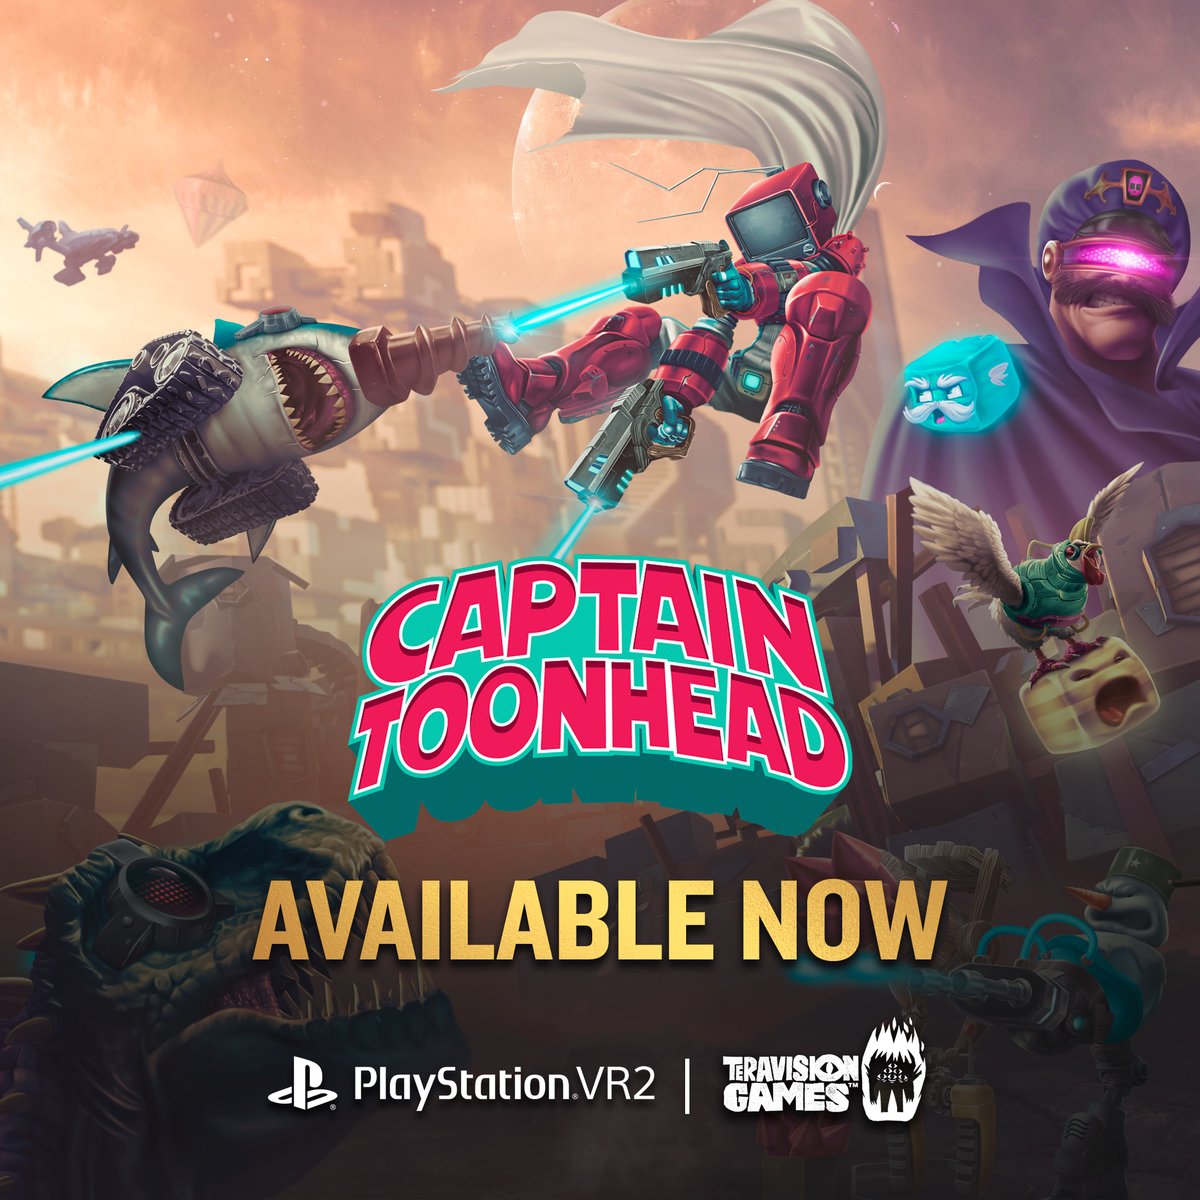 🚨 Captain ToonHead vs The Punks from Outer Space is now live on the @PlayStation Store! Join janitor-turned-hero Elliott as he battles the P.U.N.K. army with insane toonrets - hot sauce lasers, explosive piñatas, blasters & the mighty chancla! Play now on PSVR2!